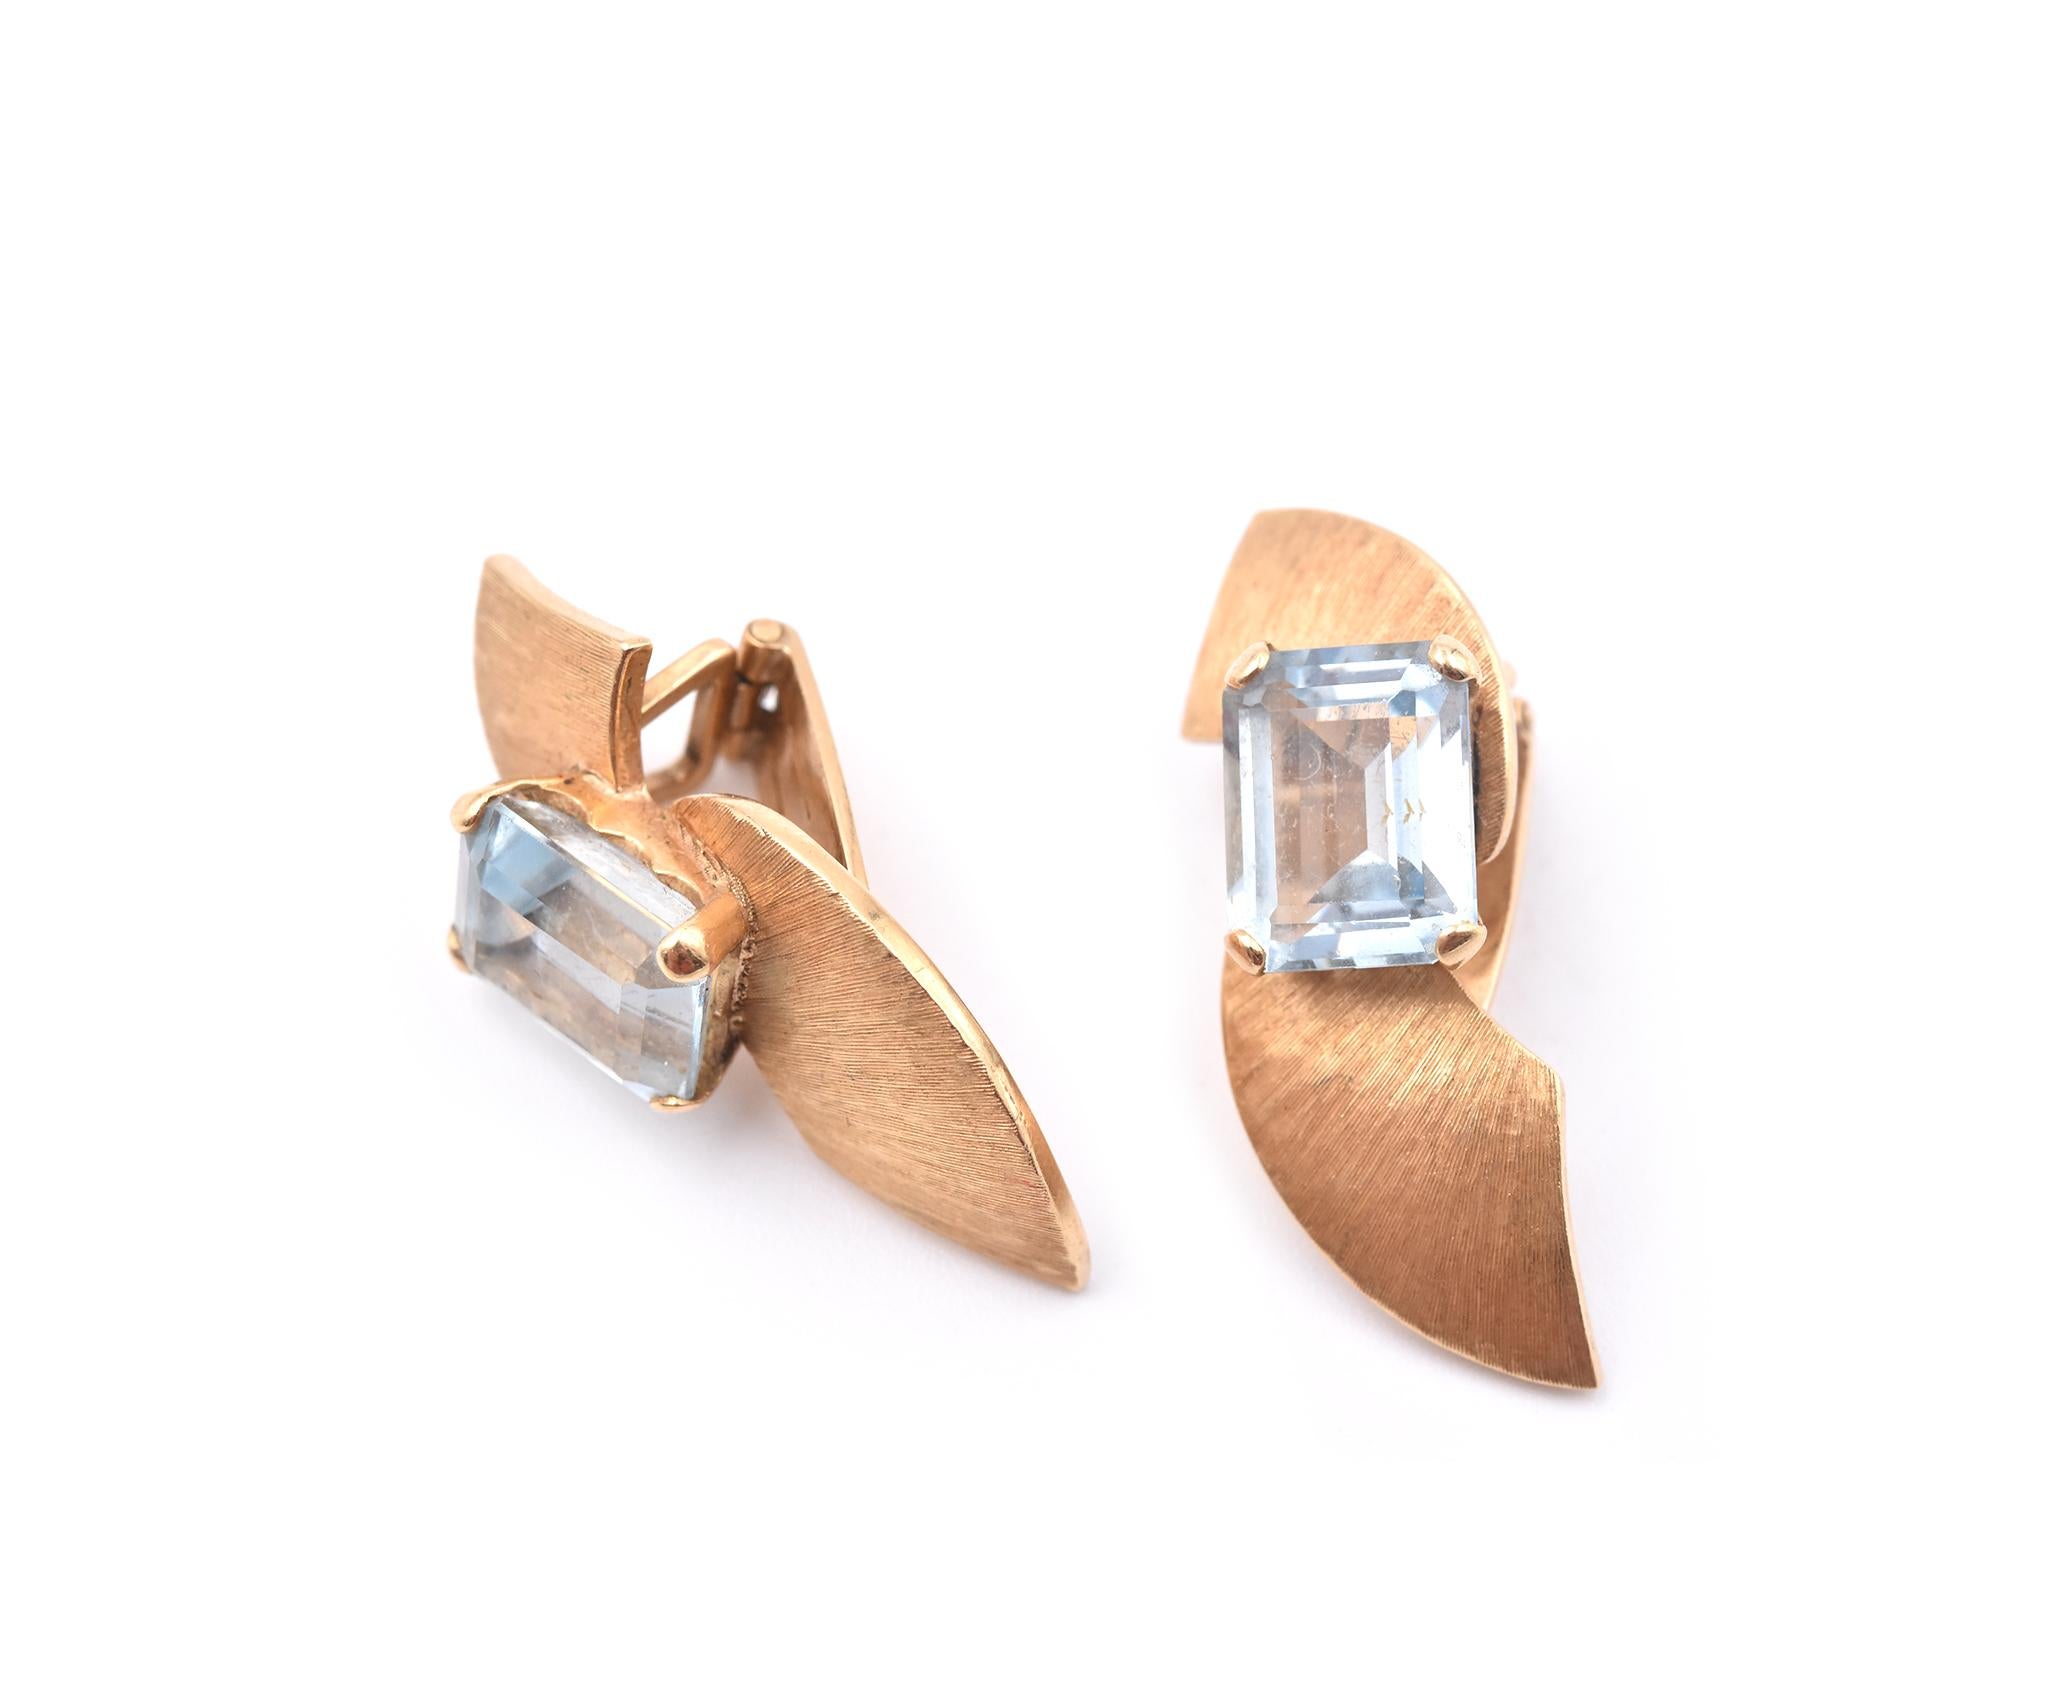 Designer: custom design
Material: 18k yellow gold
Aquamarines: 2 emerald cuts = 5.70cttw
Dimensions: earrings are approximately 10.46mm x 30.32mm
Fastenings: clip-on
Weight: 8.71 grams
